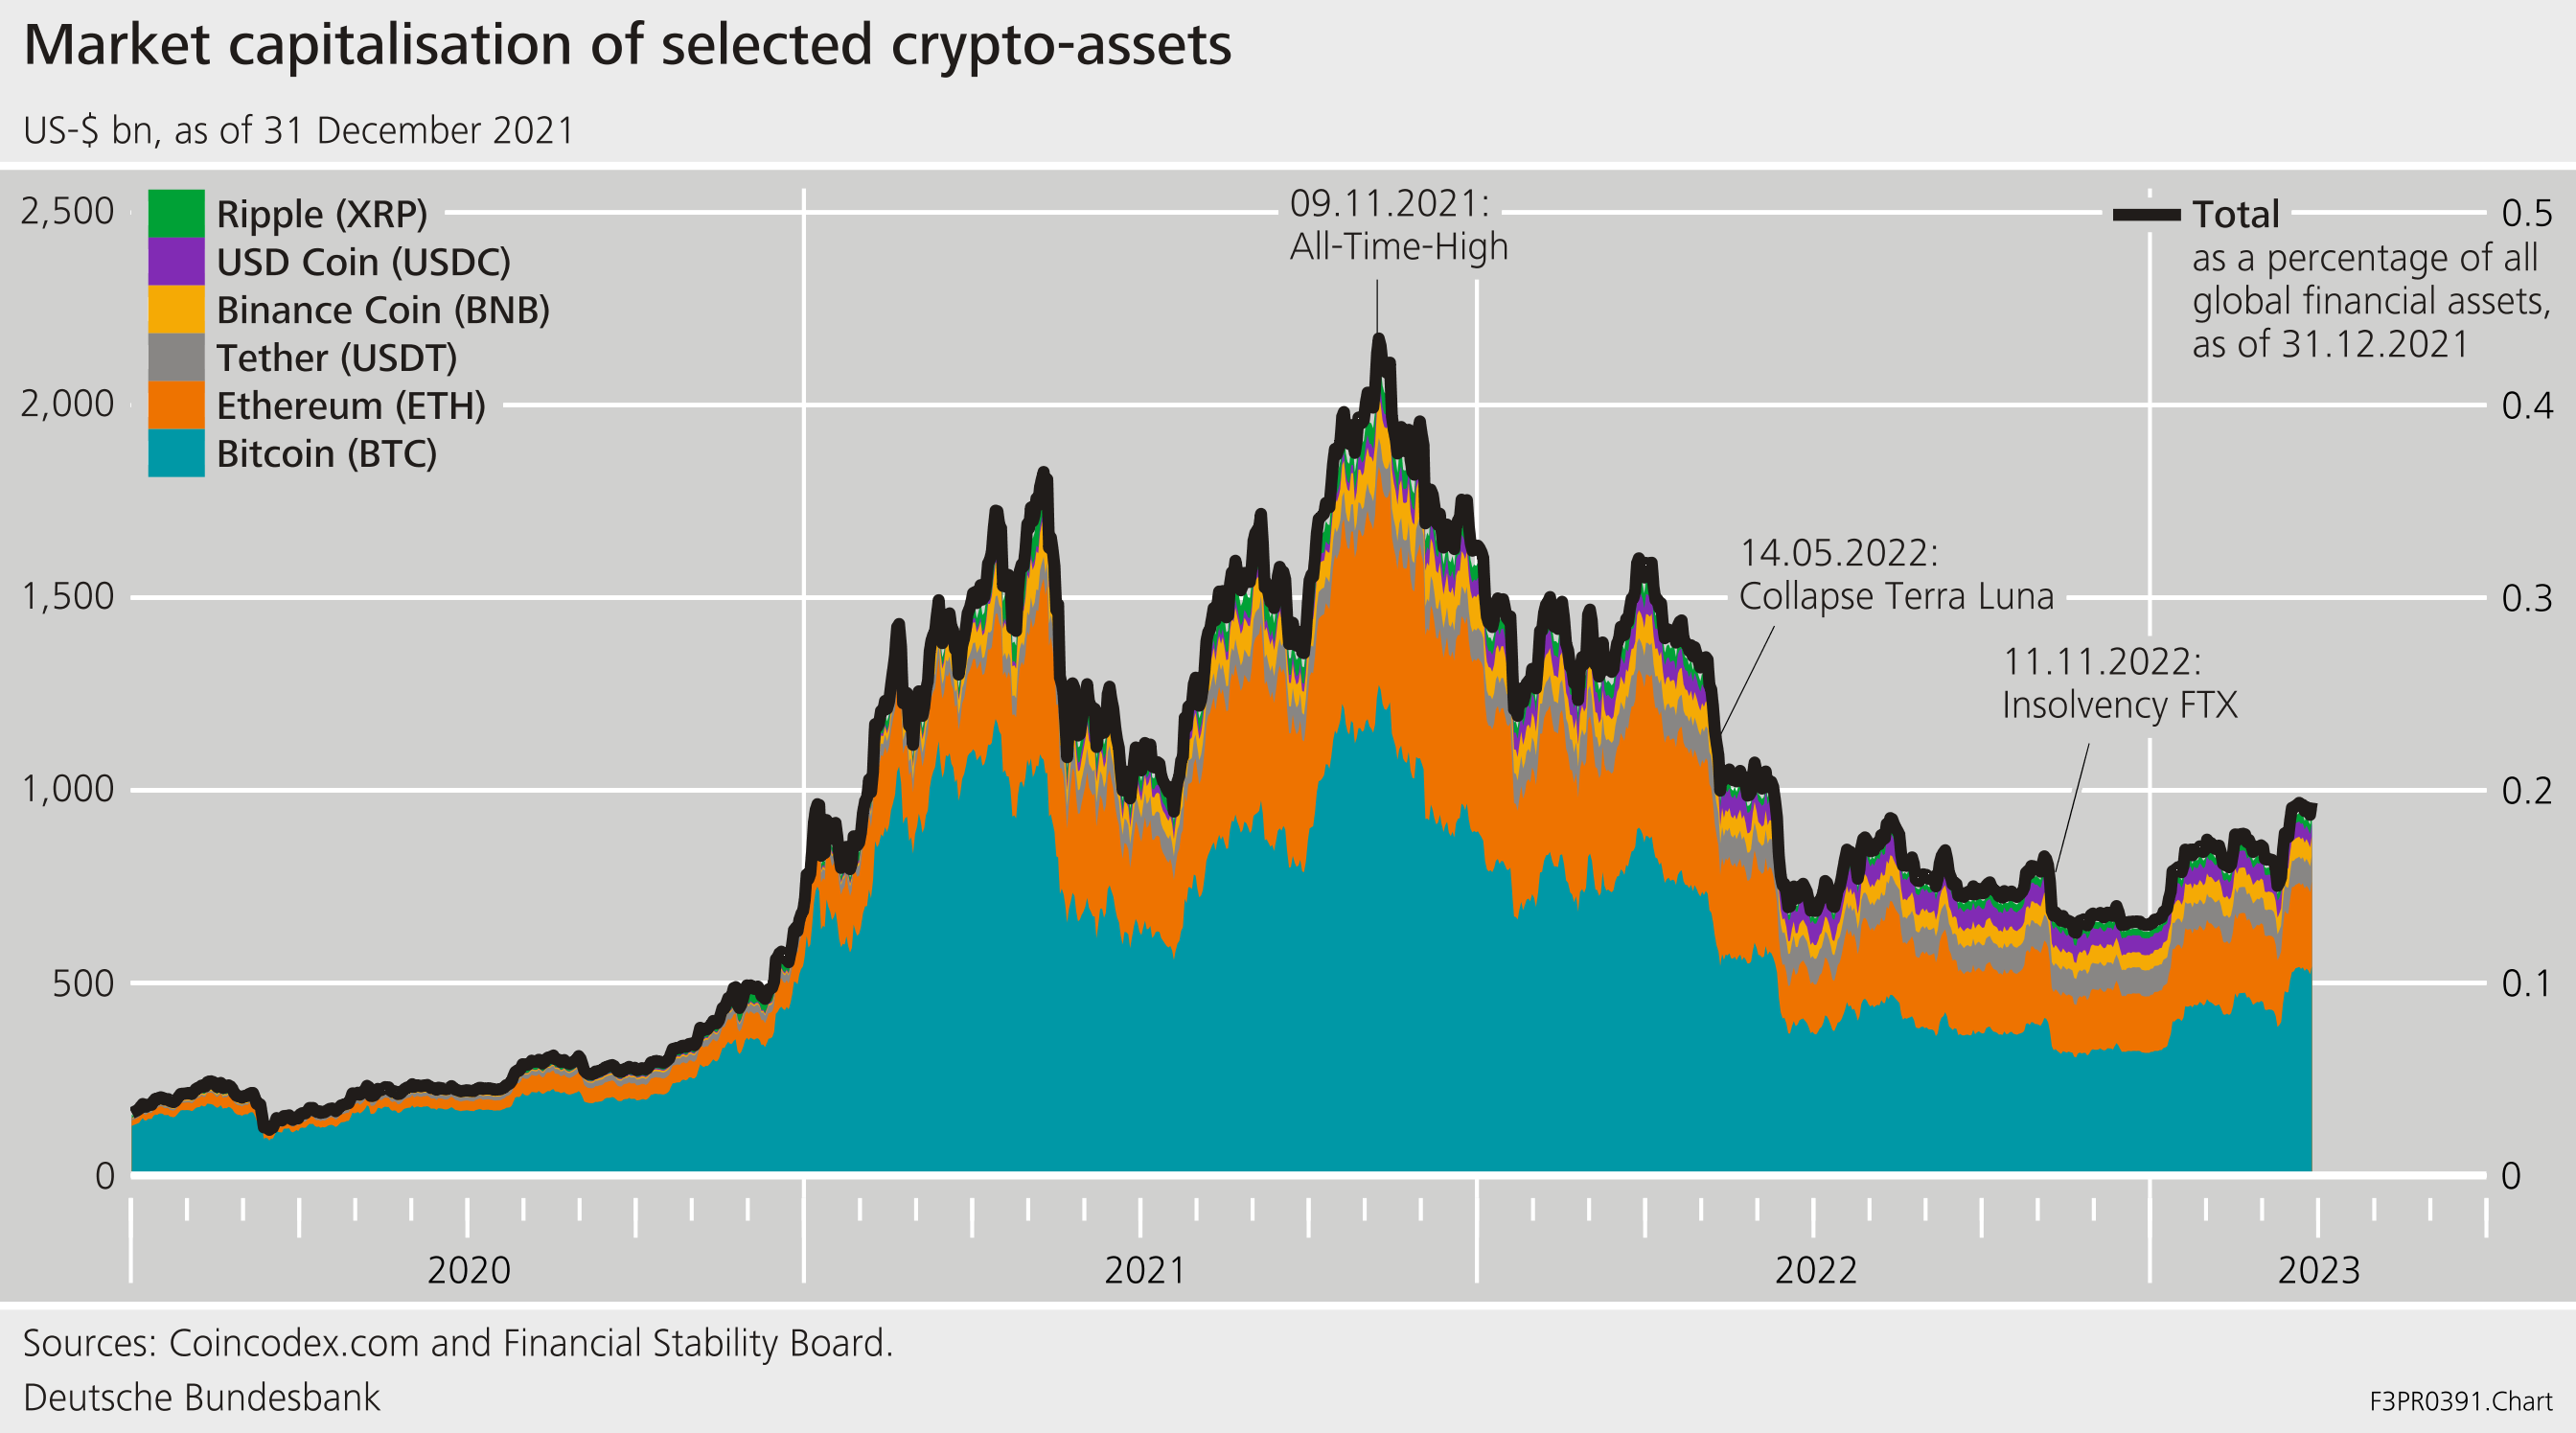 Chart 4: Market capitalisation of crypto-assets is highly concentrated and low compared to the traditional financial system.